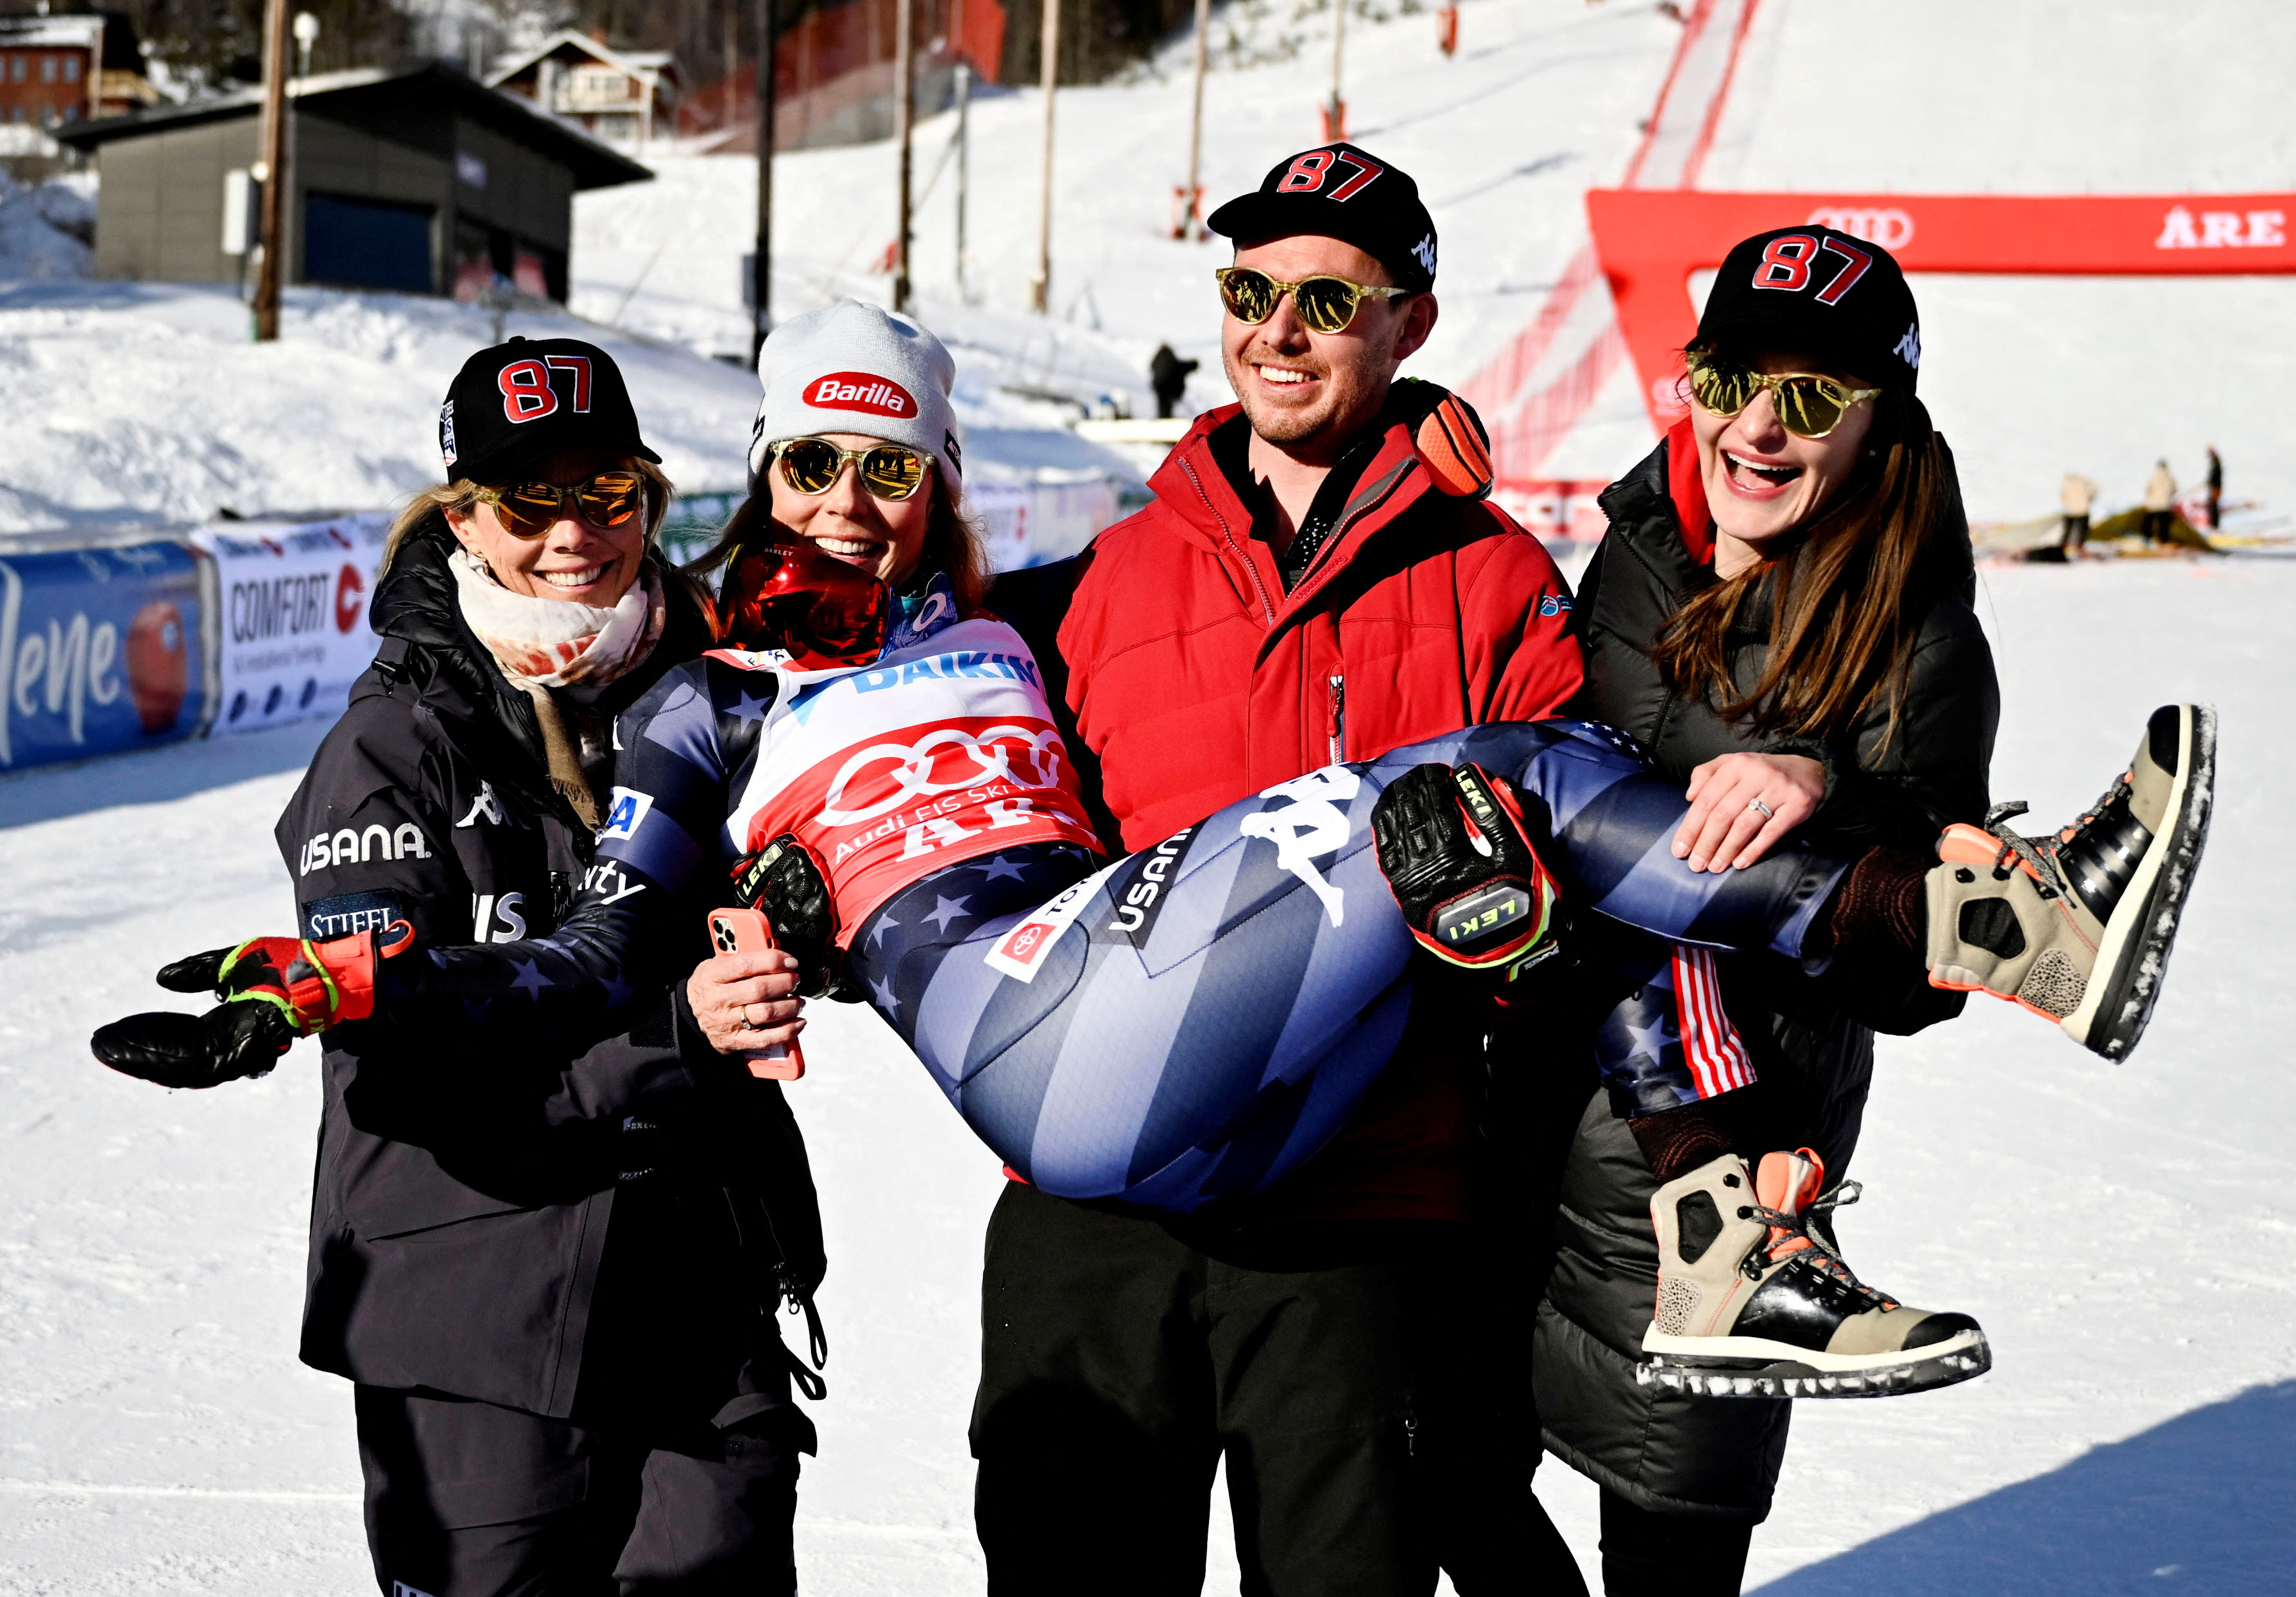 FIS Alpine Ski World Cup - Are, Sweden - March 11, 2023 Mikaela Shiffrin of the U.S. celebrates winning the women's slalom with her mother Eileen Shiffrin and her brother Taylor Shiffrin with his wife Pontus Lundahl/TT News Agency via REUTERS.